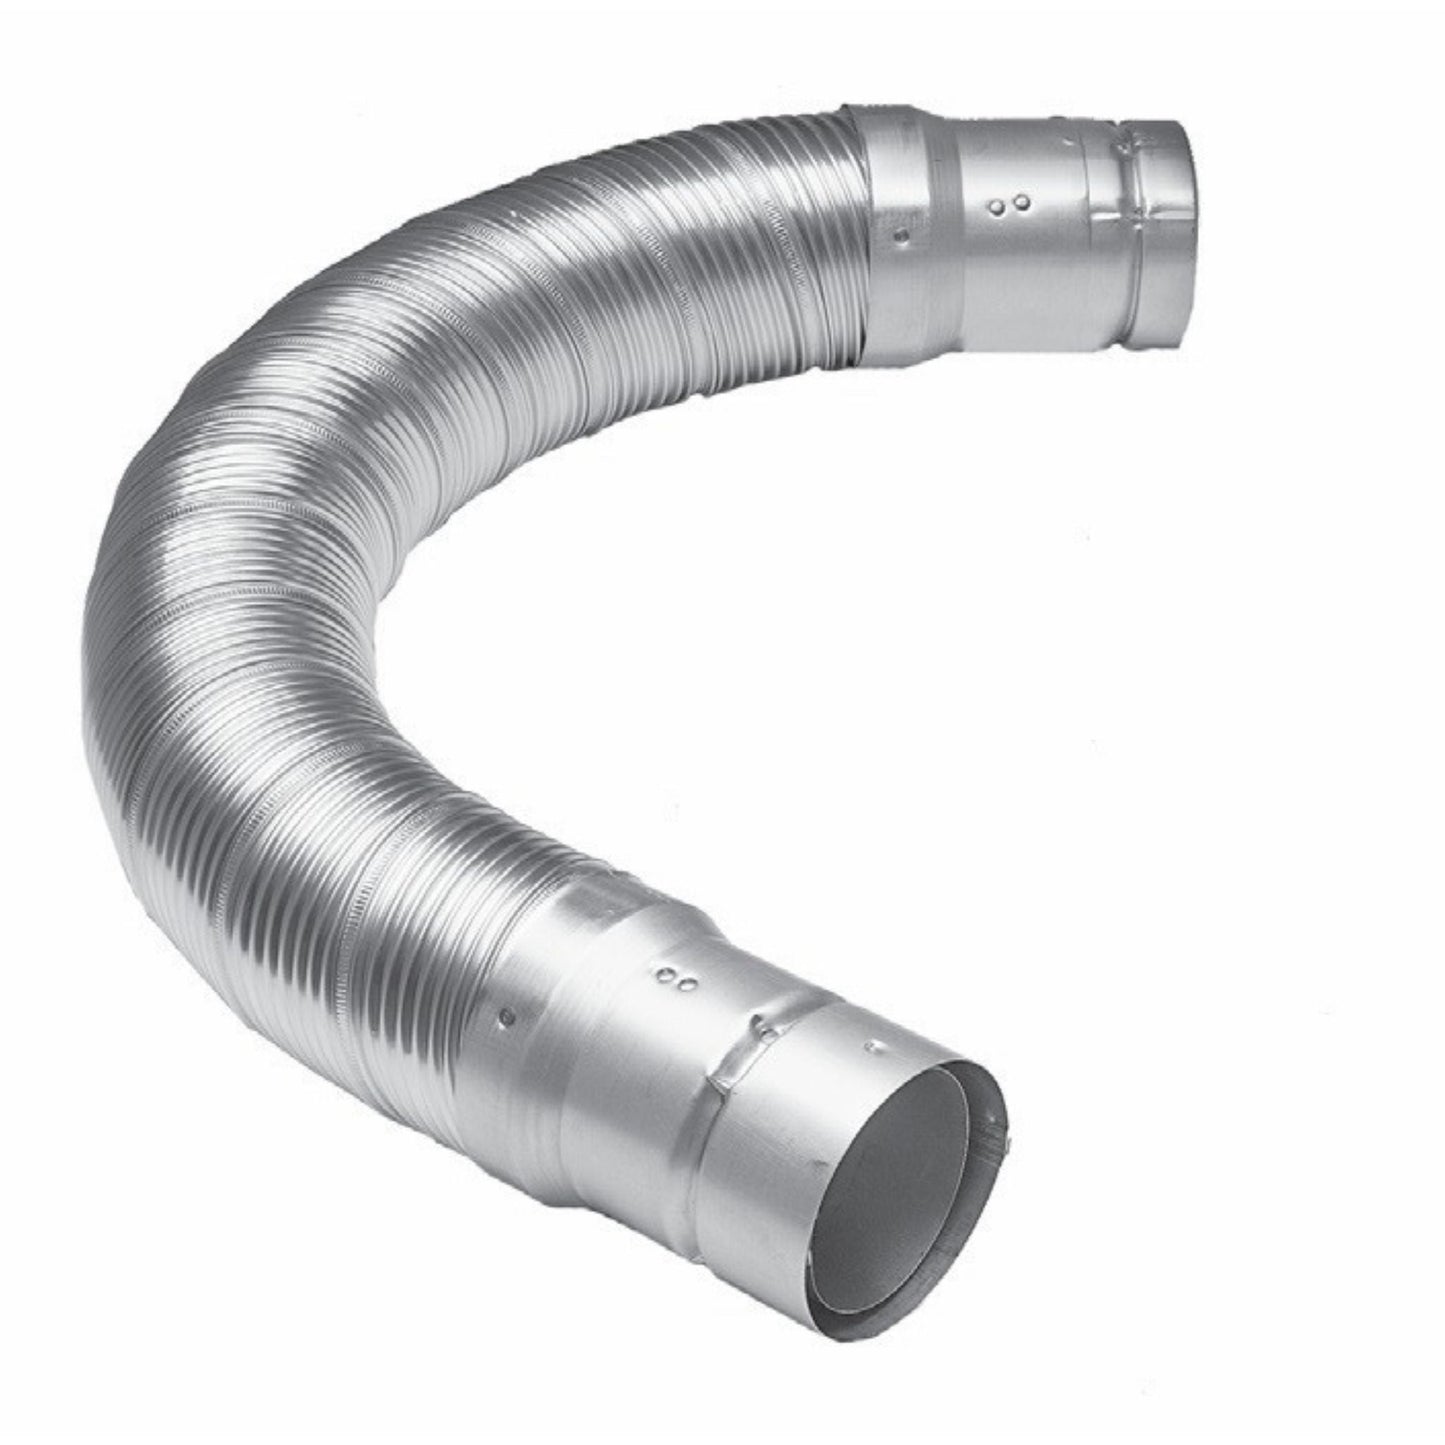 DuraVent DuraConnect II B-Vent 5" x 24" Flexible Double-Wall Gas Vent Connector